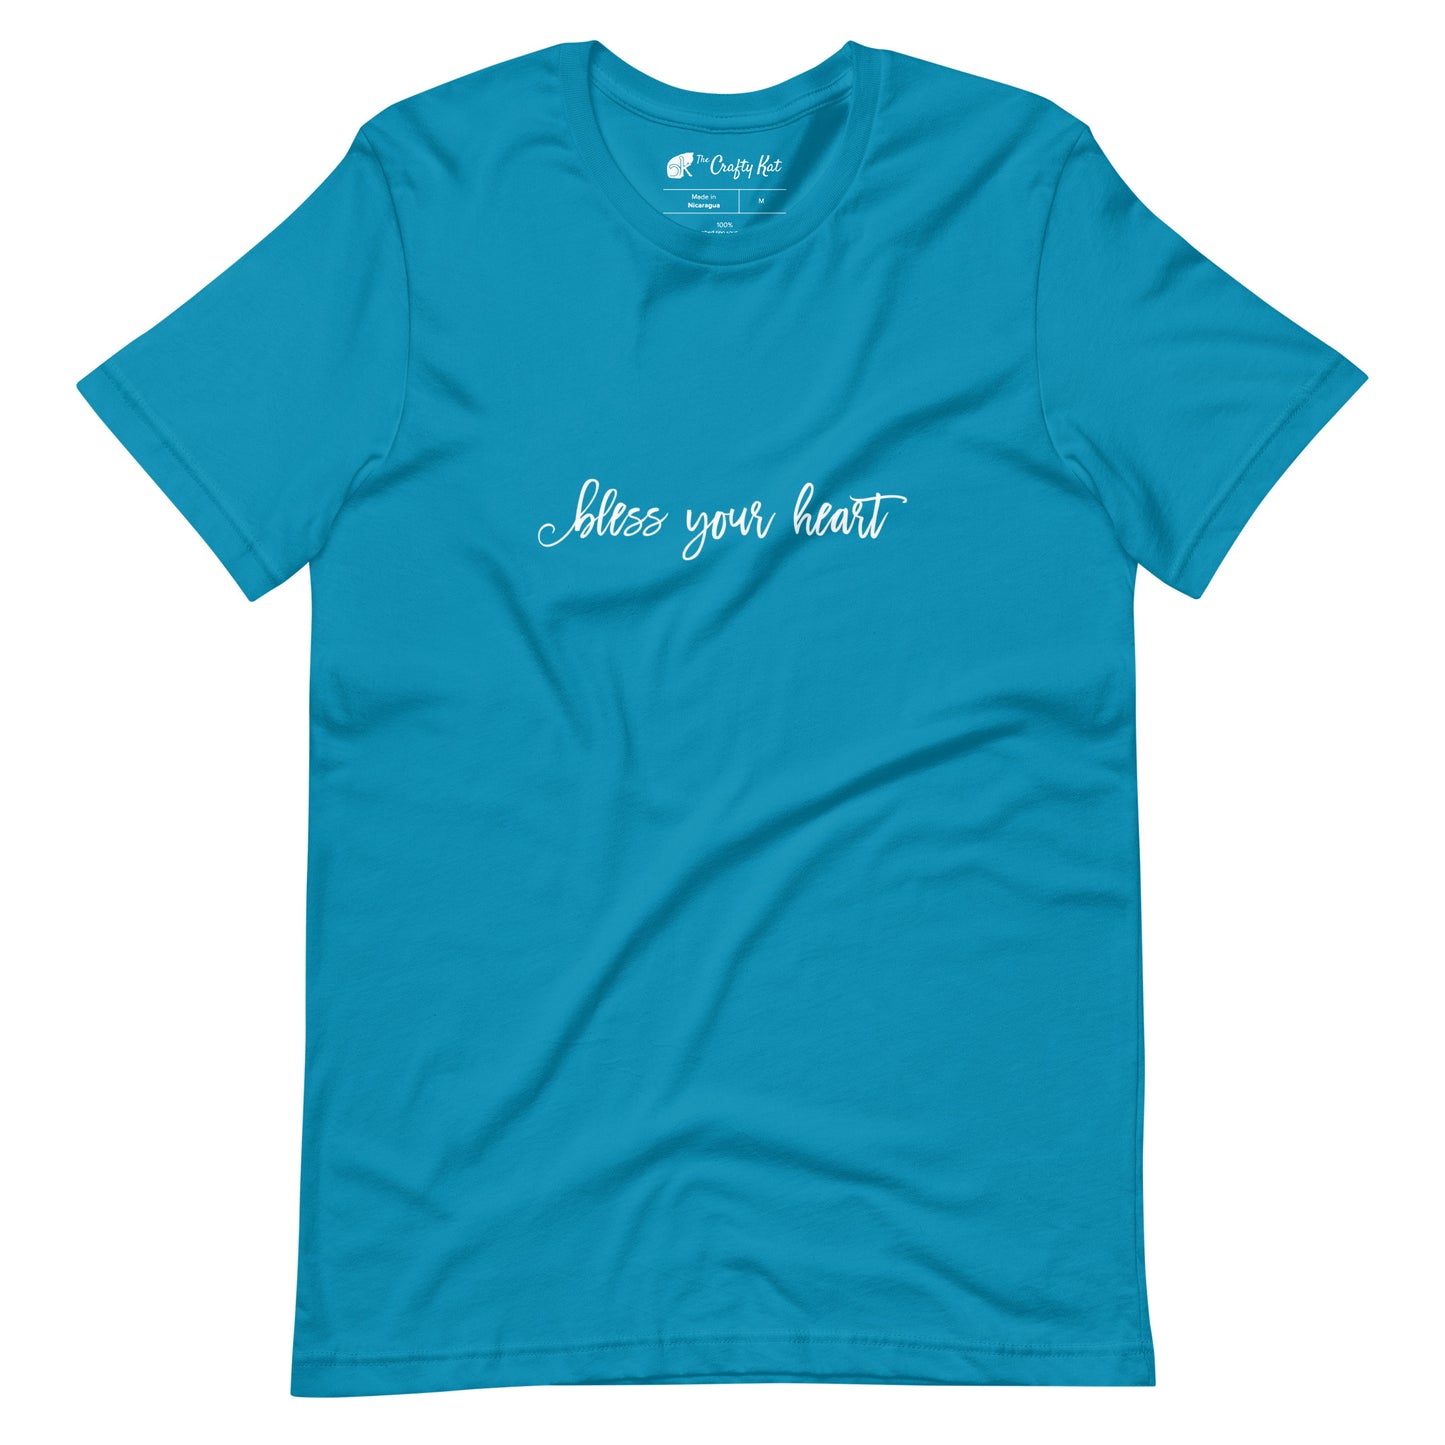 Aqua (cyan) t-shirt with white graphic in an excessively twee font: "bless your heart"